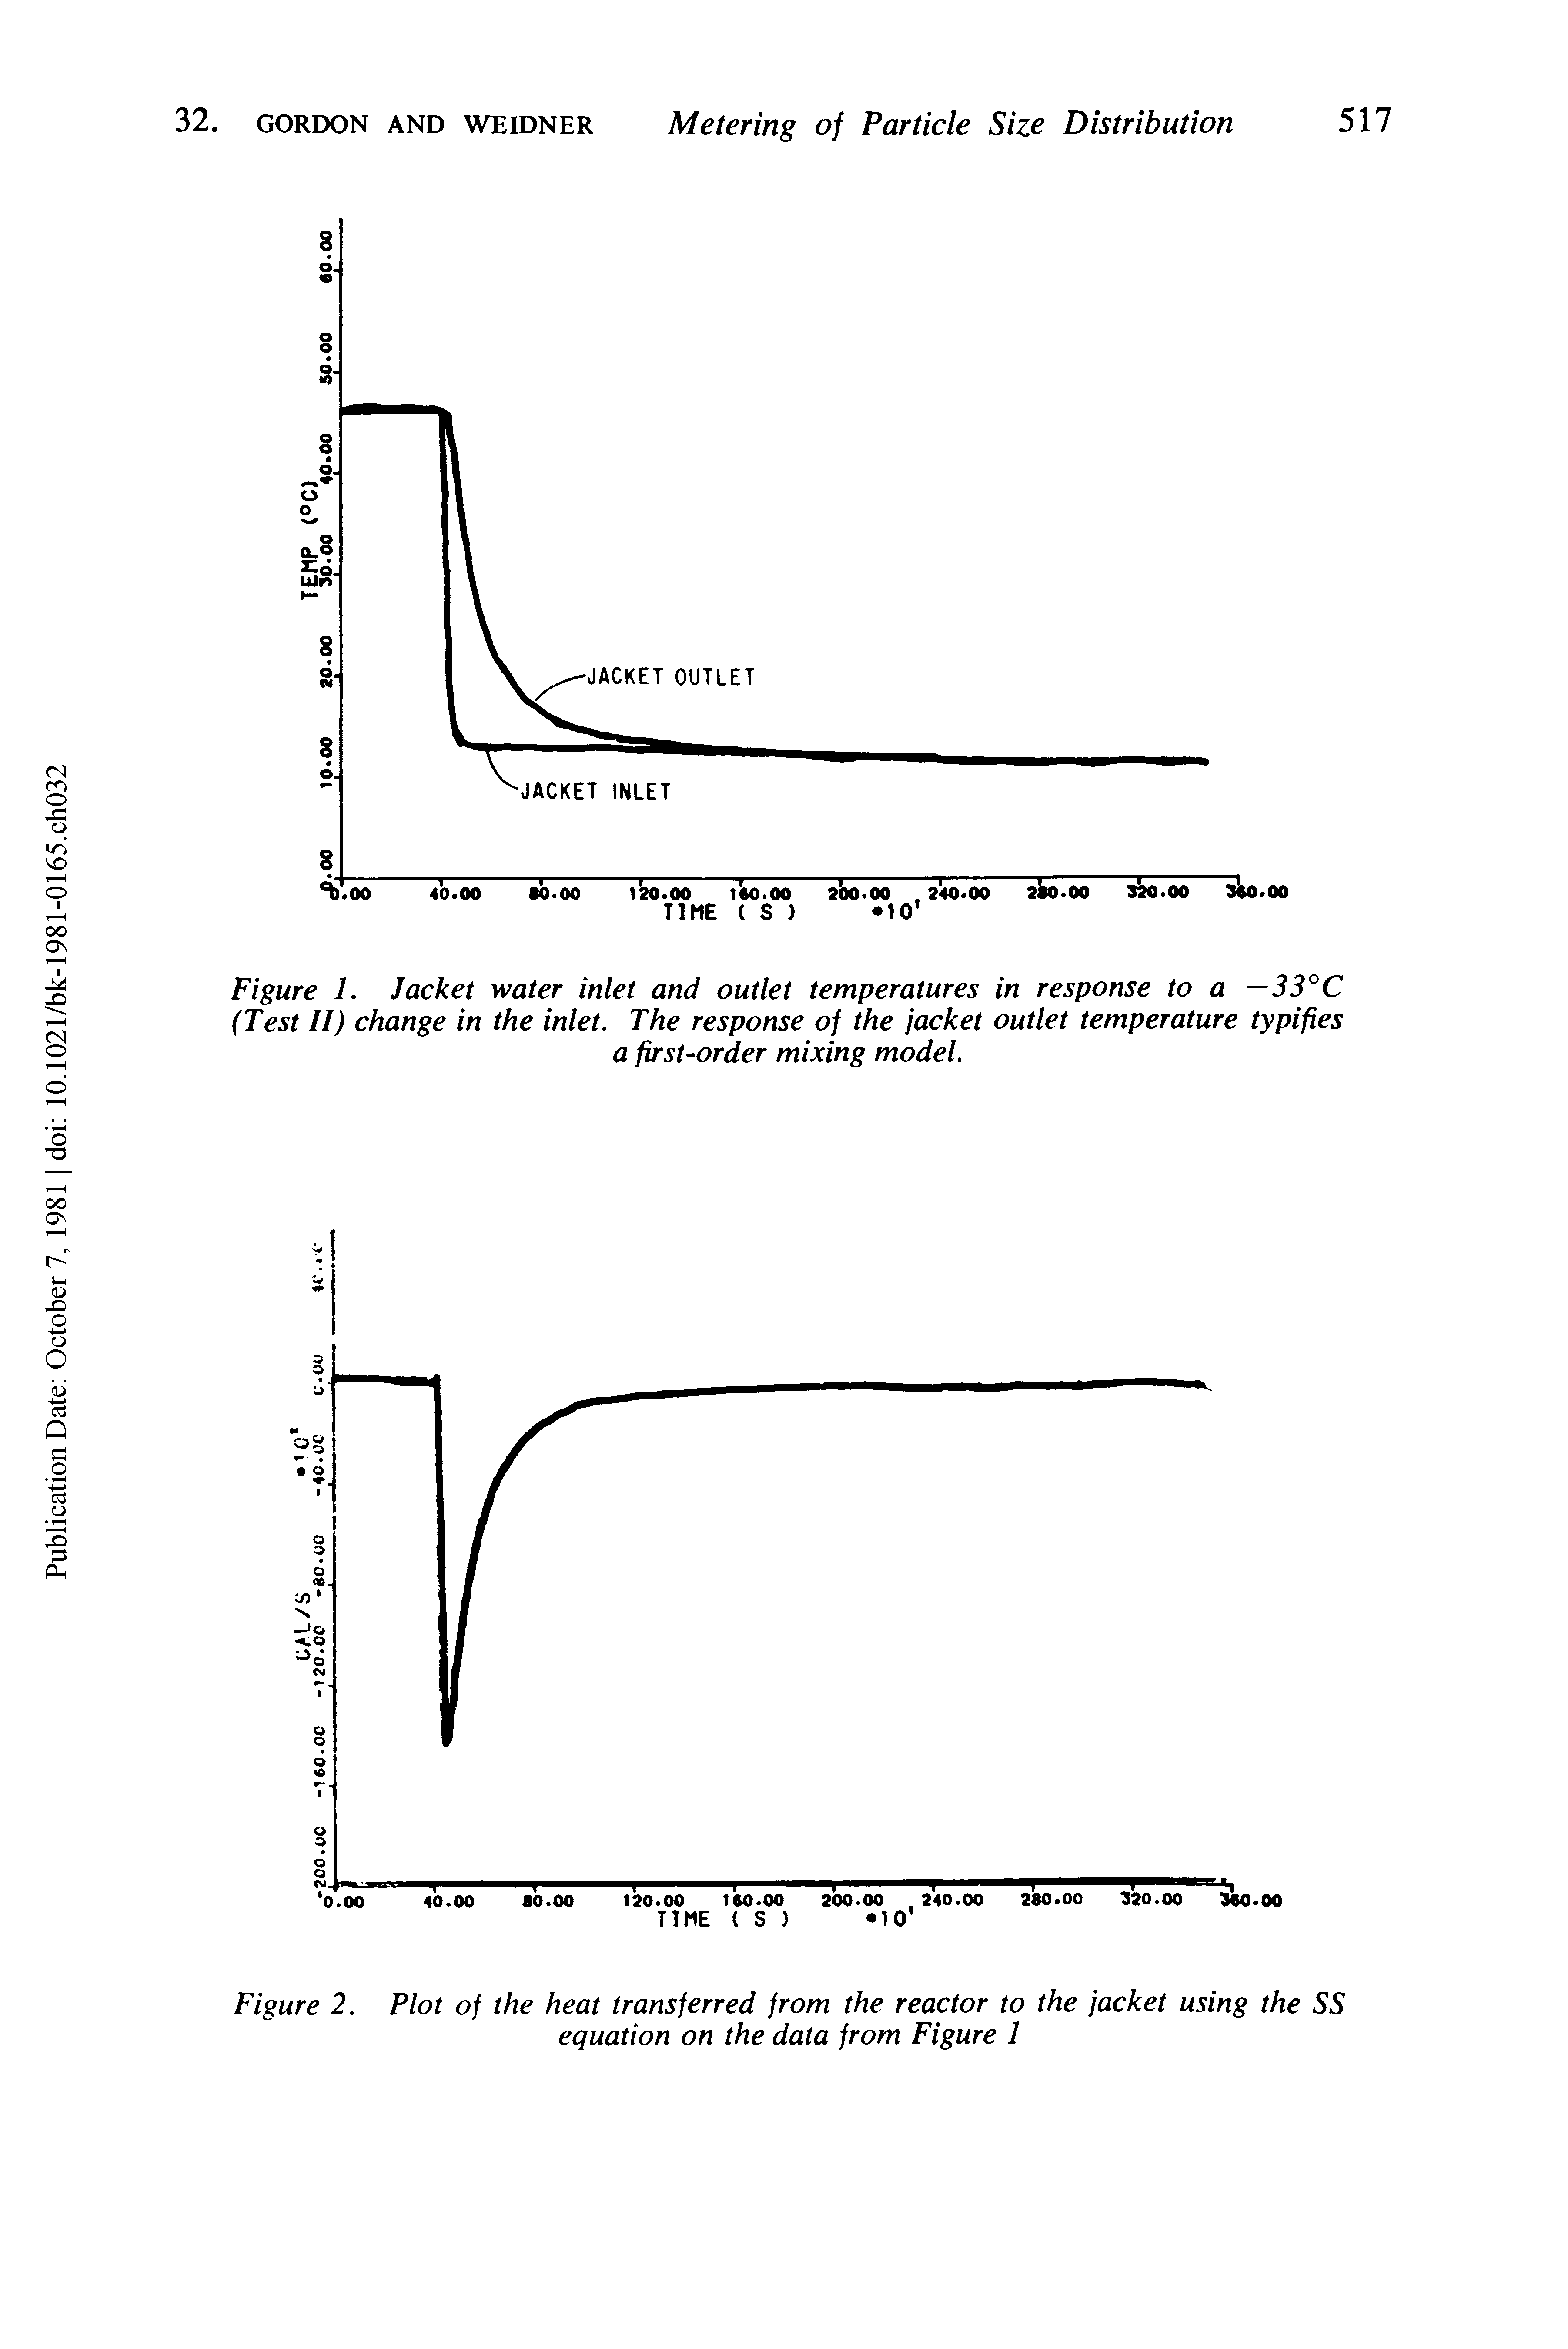 Figure 1. Jacket water inlet and outlet temperatures in response to a —33°C (Test II) change in the inlet. The response of the jacket outlet temperature typifies a first-order mixing model.